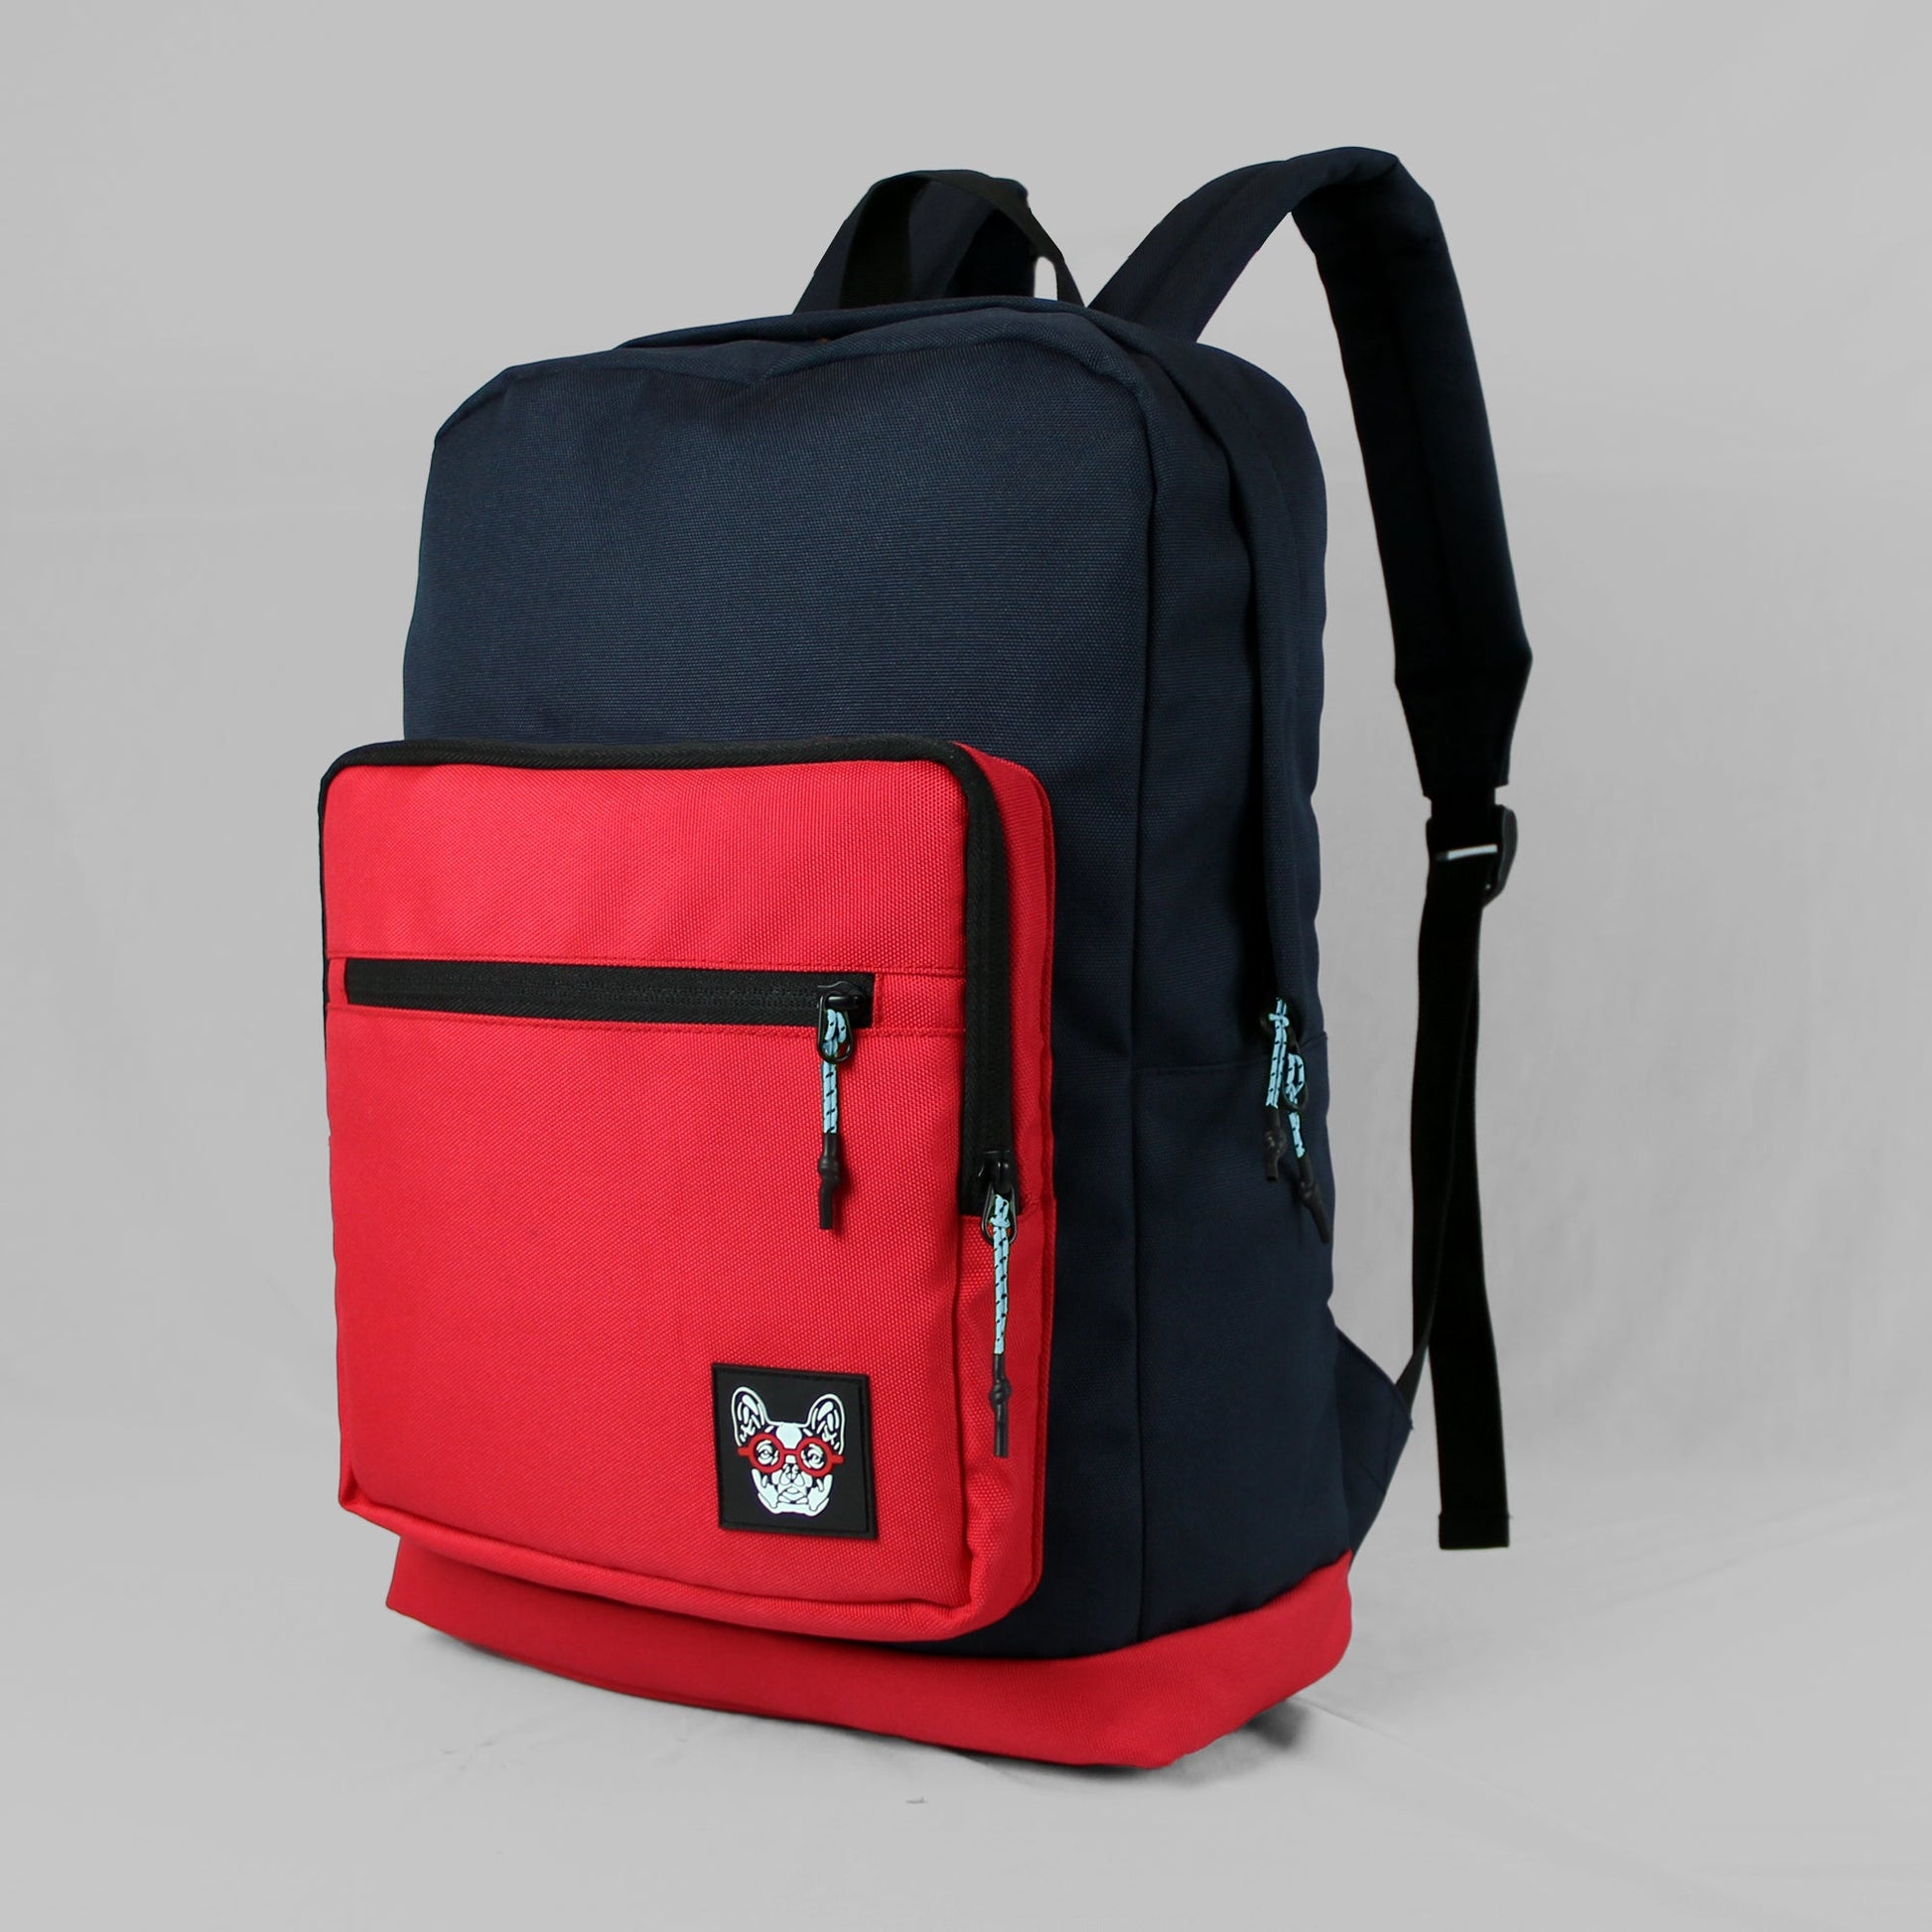 MAD-PACK AURORA Small Laptop Backpack by MADBRAG